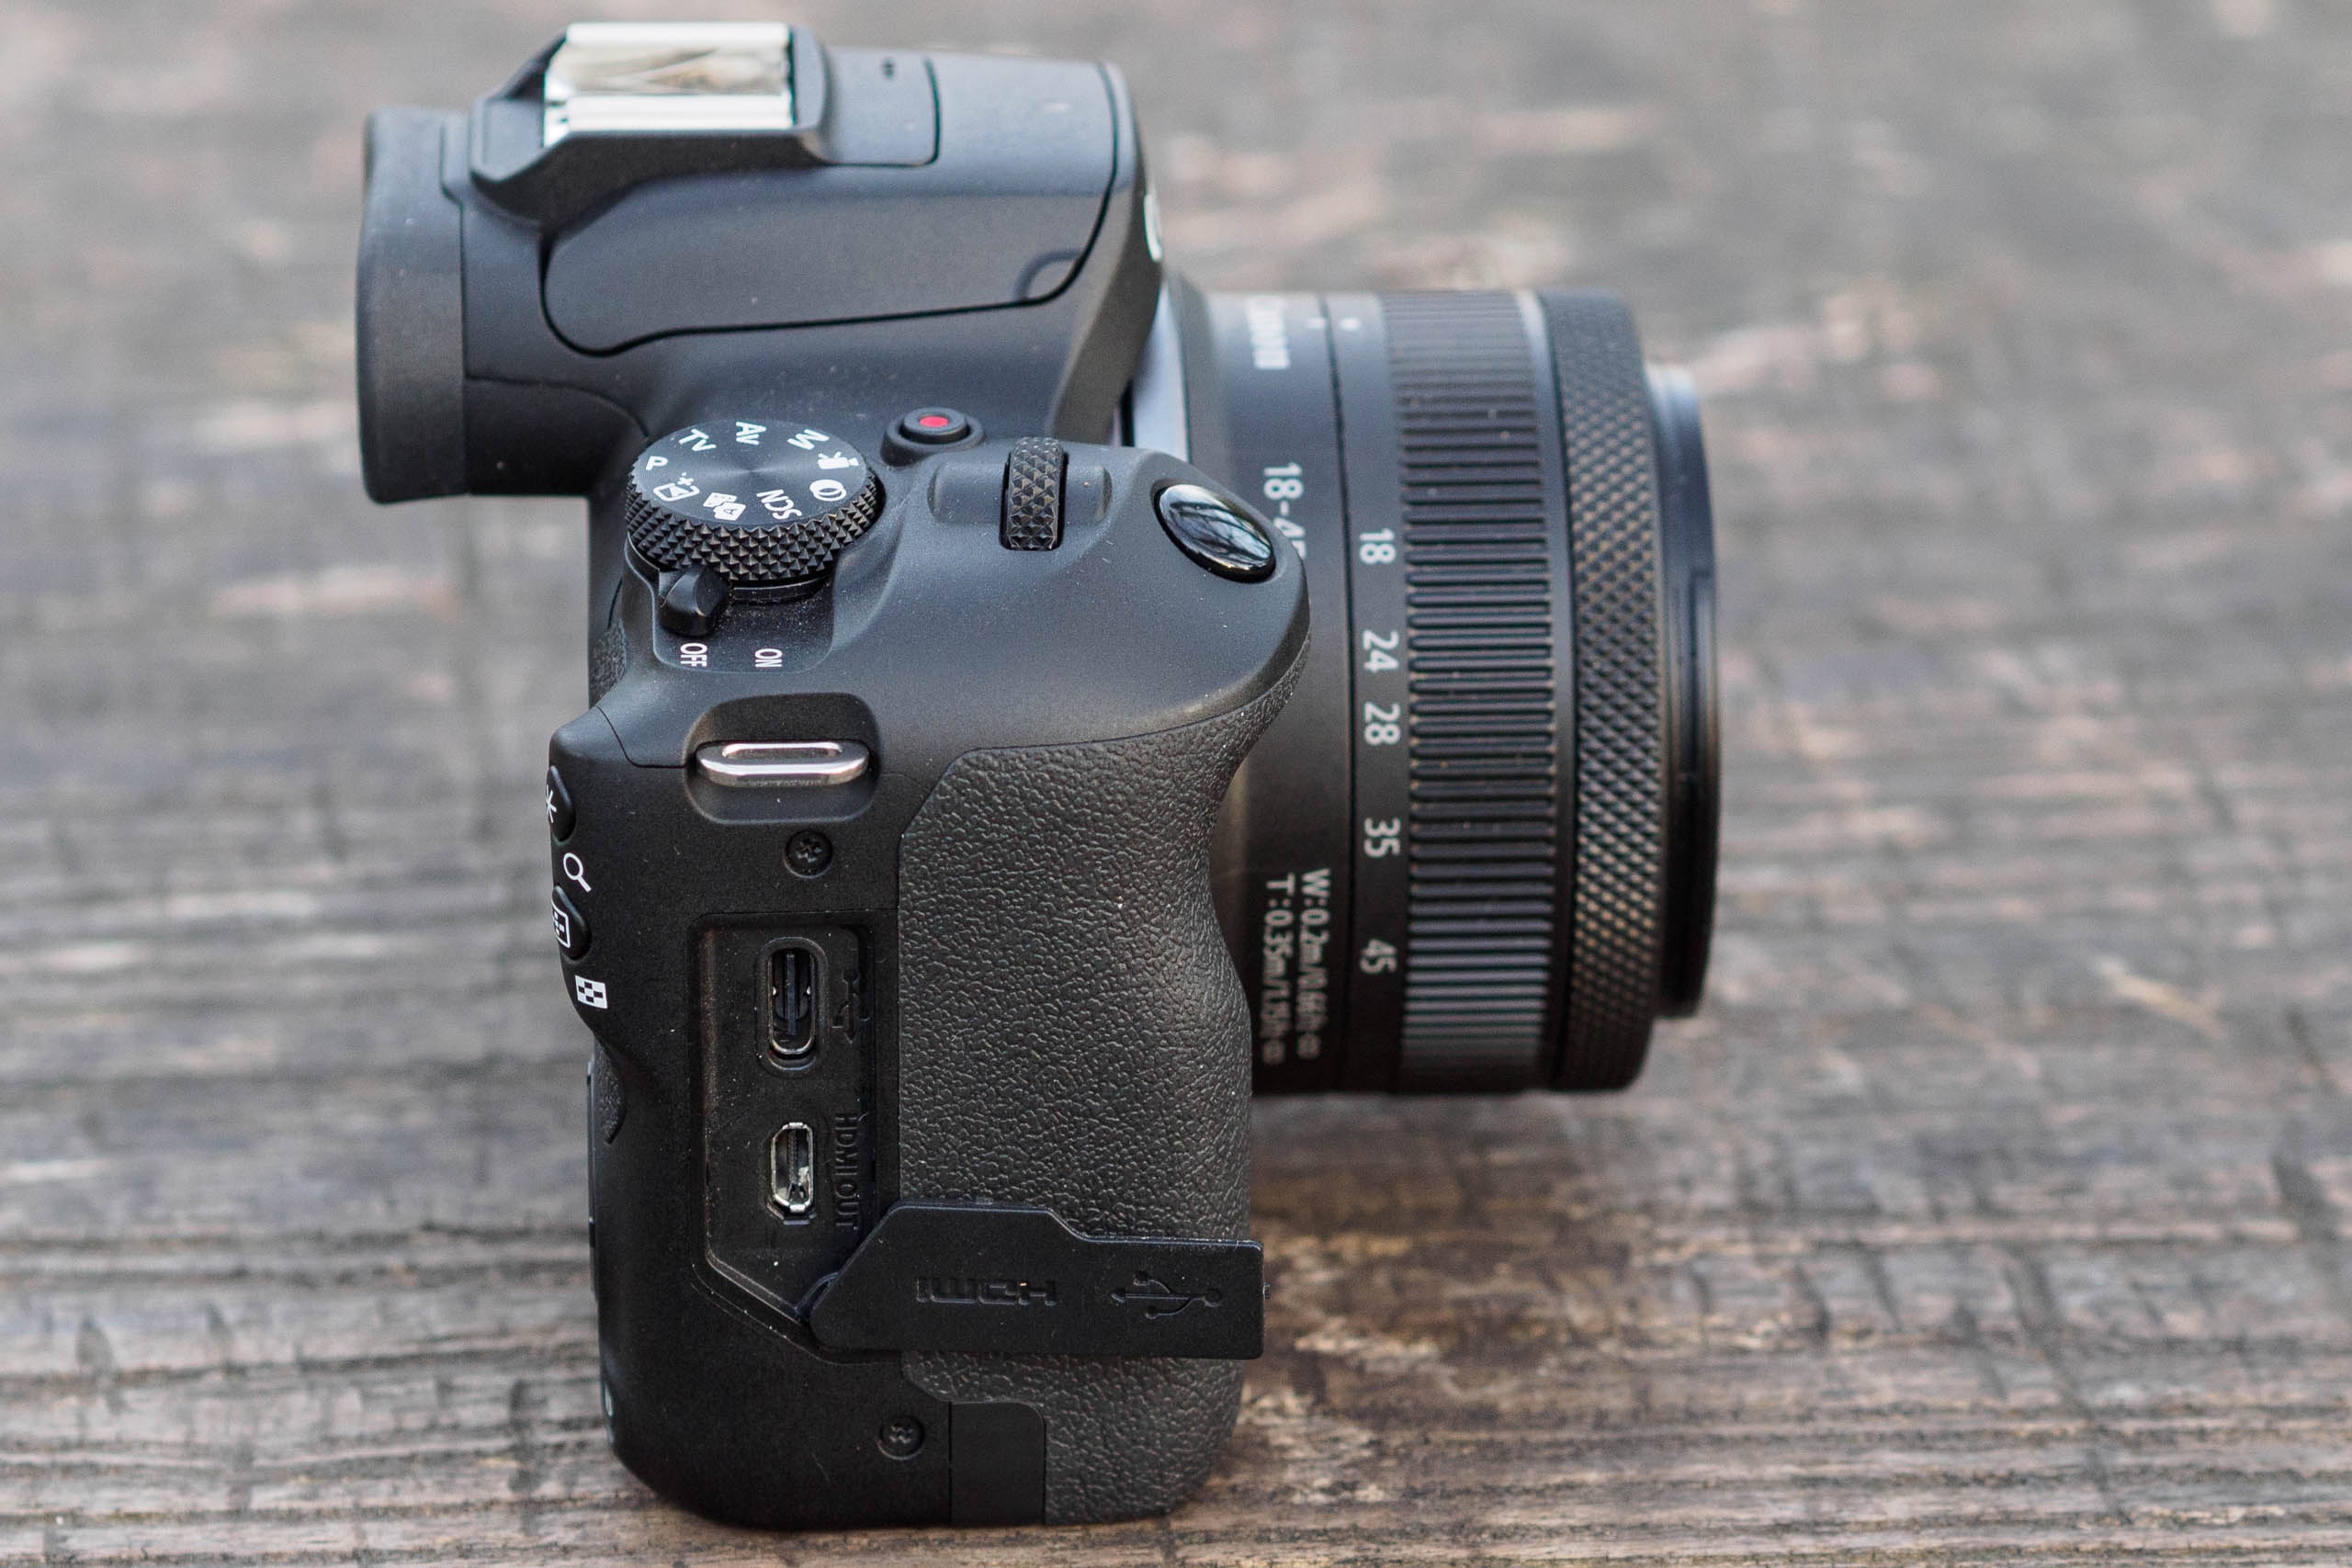 Canon EOS R100 Hands-on Review - Camera Jabber